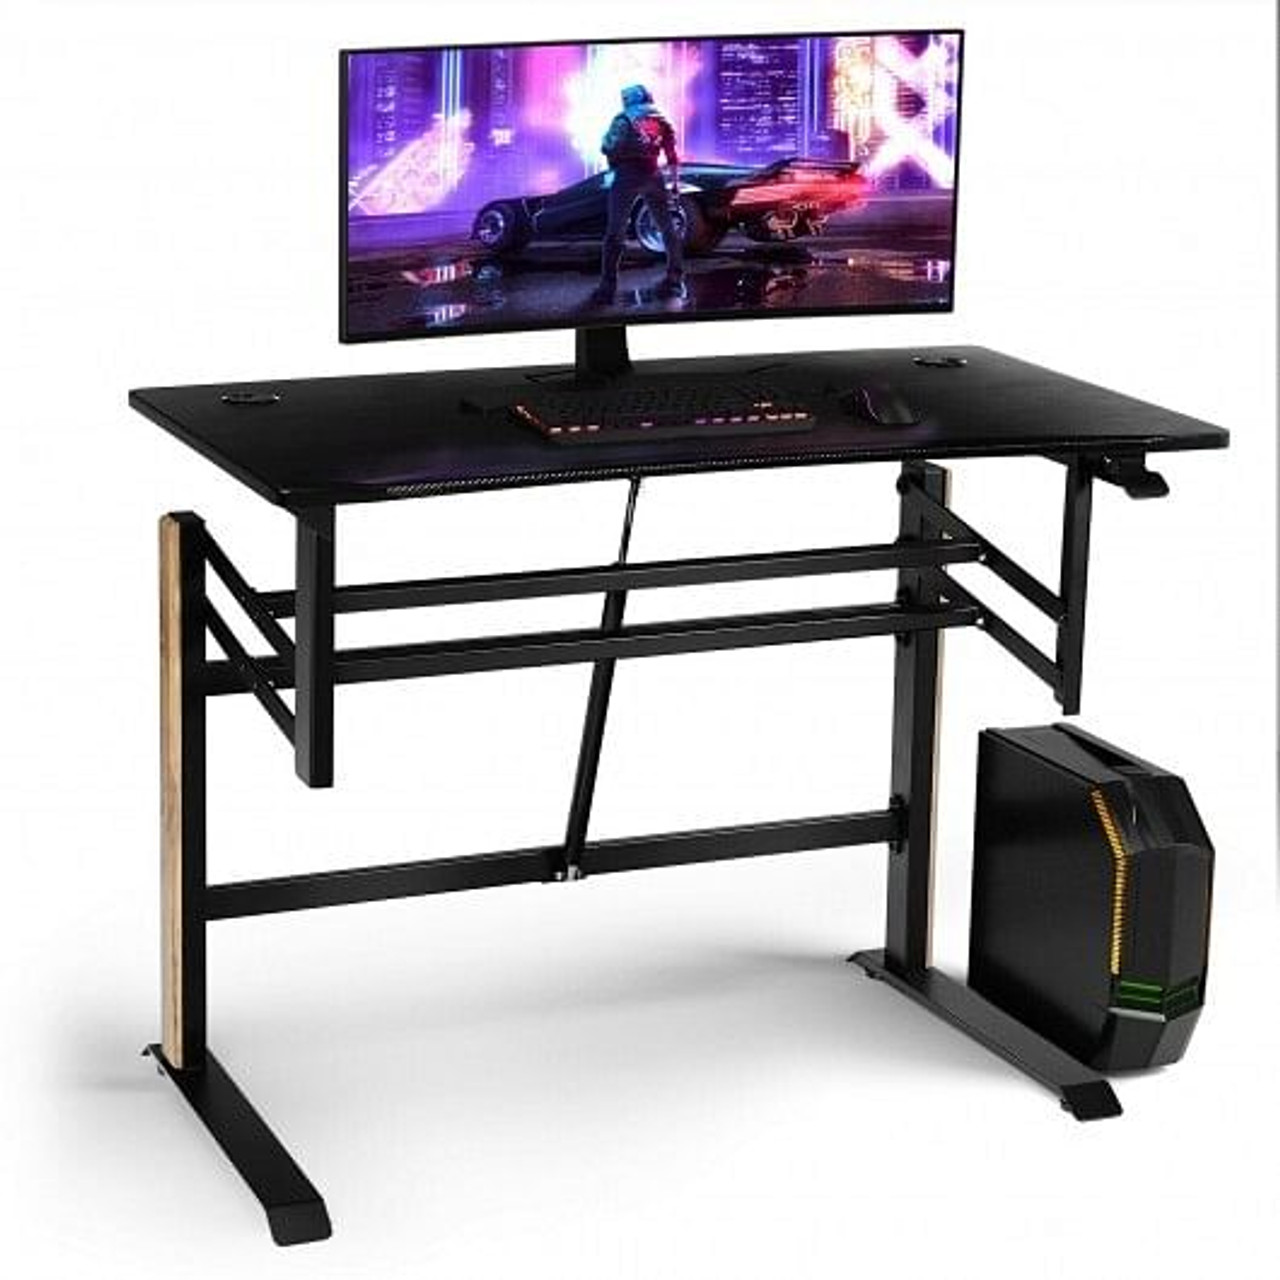 Pneumatic Height Adjustable Gaming Desk T Shaped Game Station with Power Strip Tray-Black